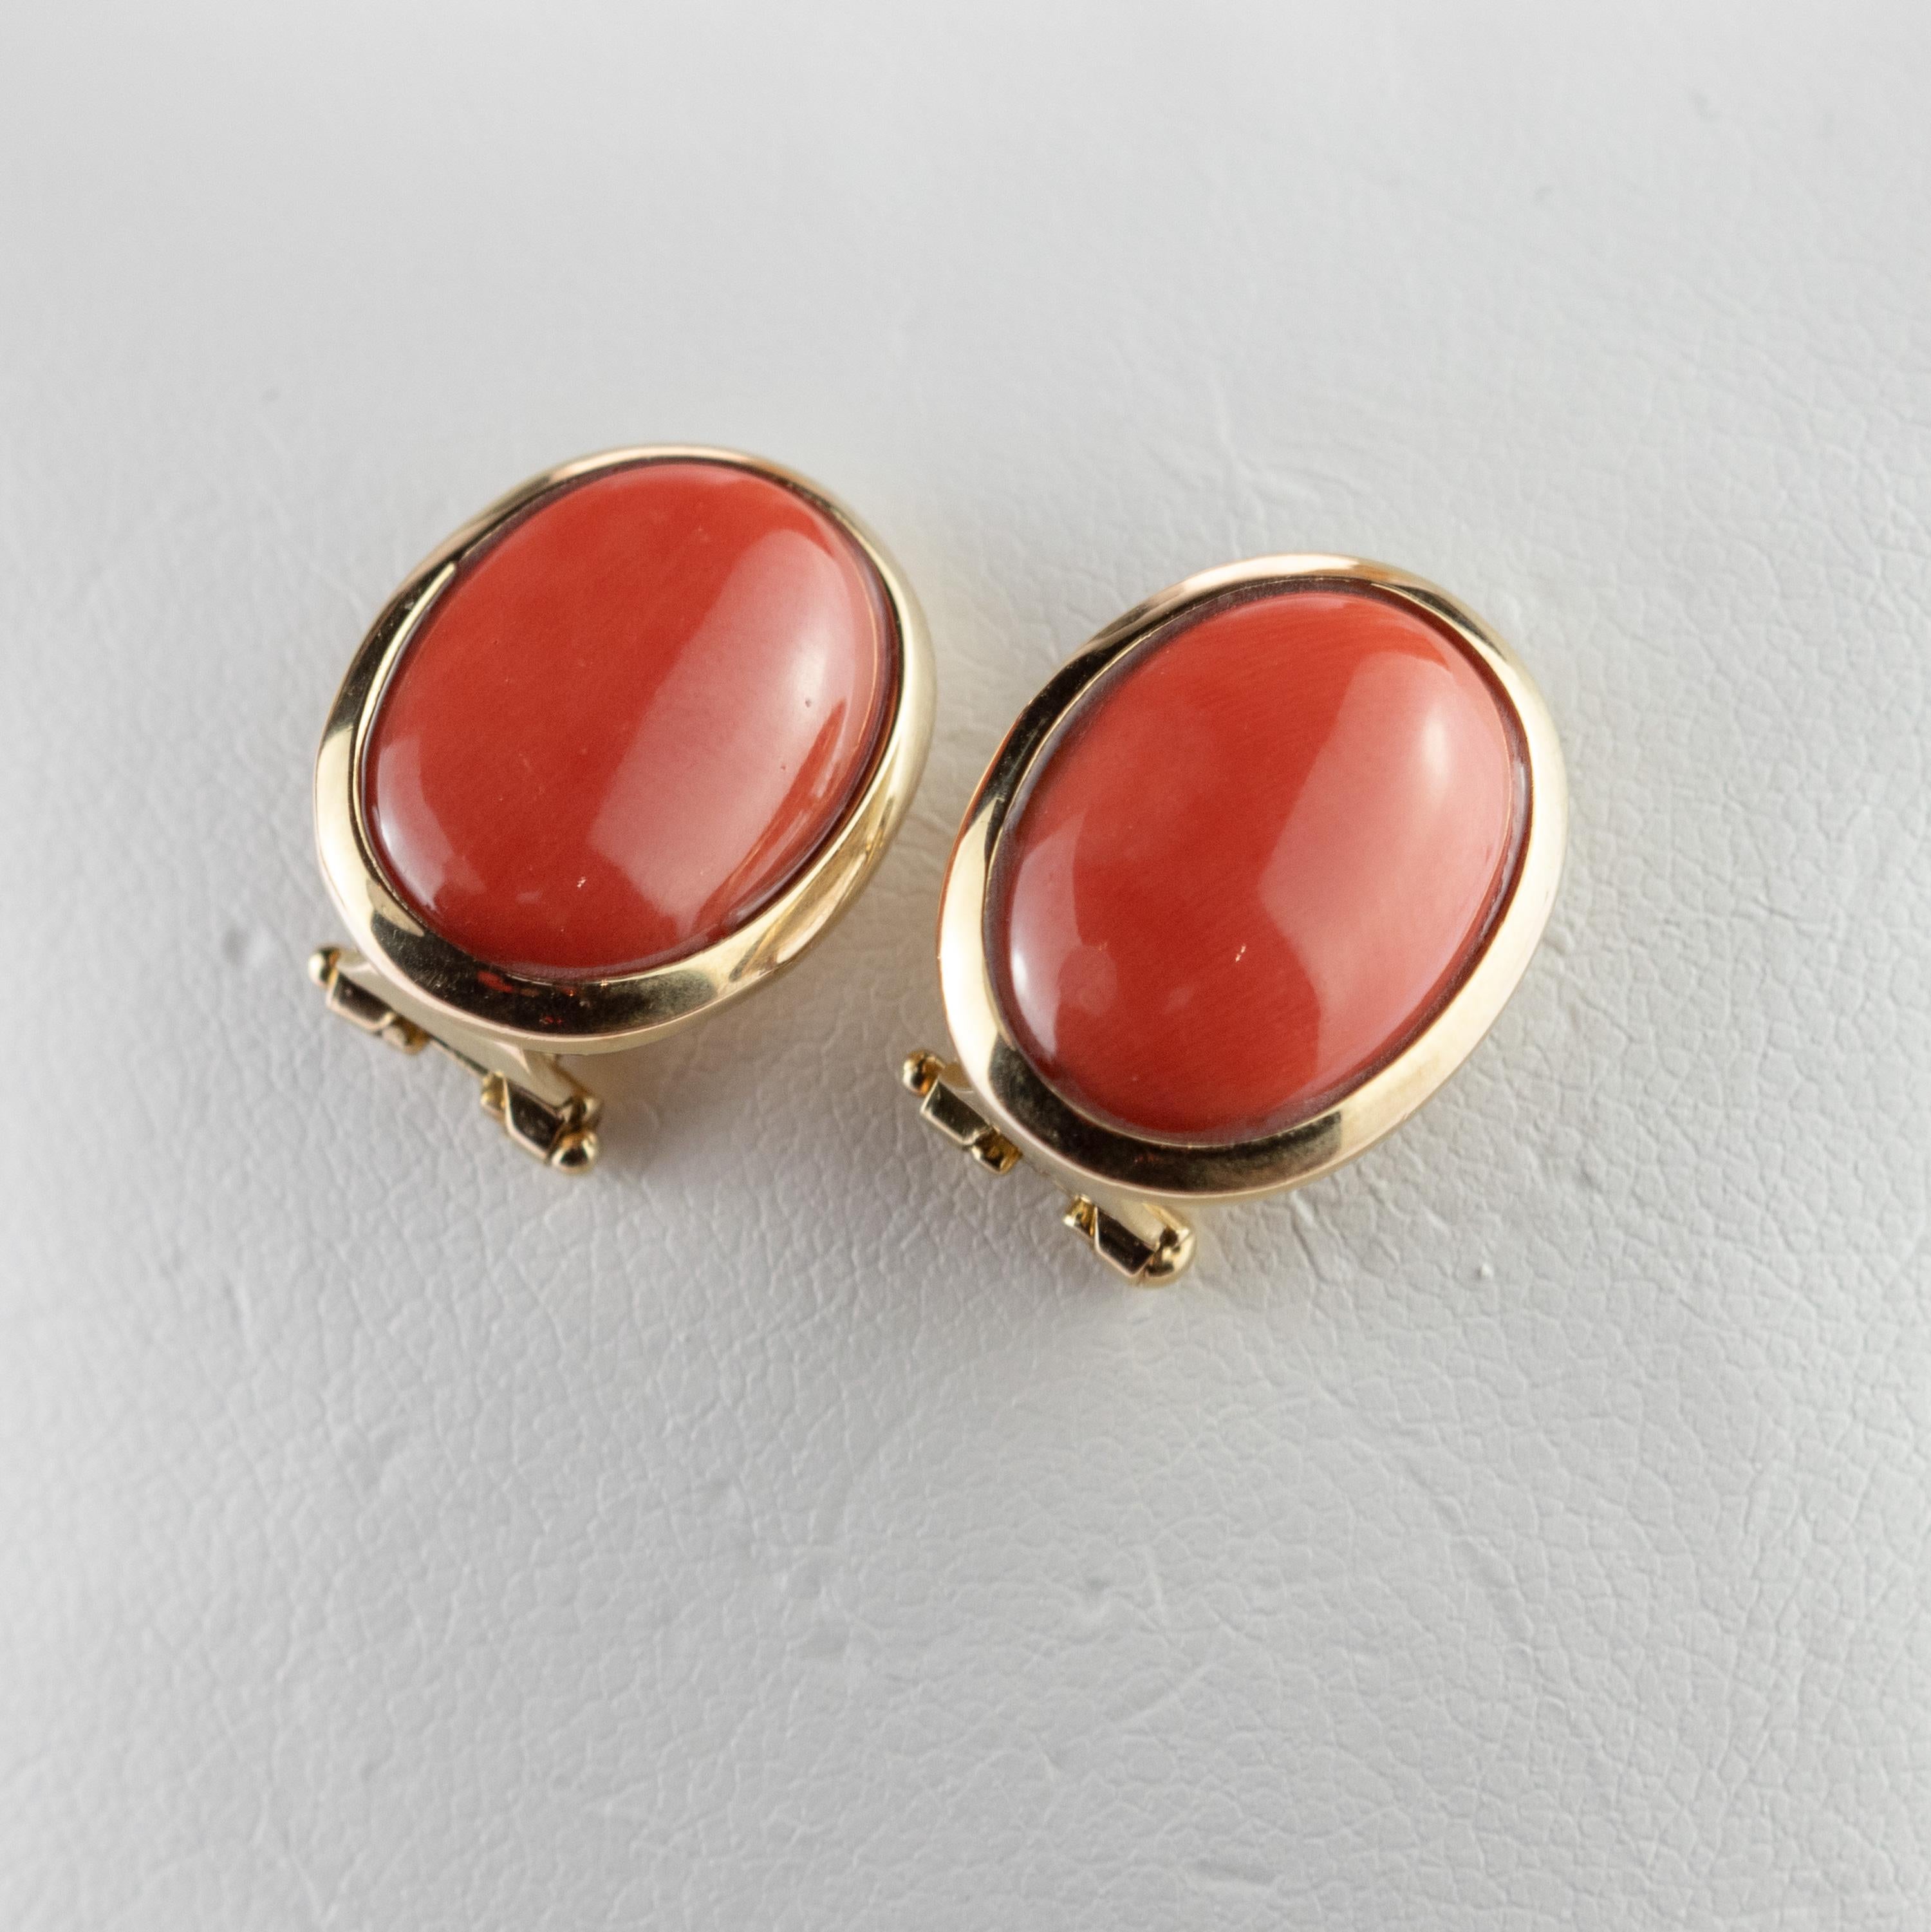 Vintage style elegant earrings, in a lever back setting of 18 karat yellow gold where stunning natural coral cabochons steal the scene.

In the simplicity of the design and the elegance of the materials, this peace creates a delicate form that is